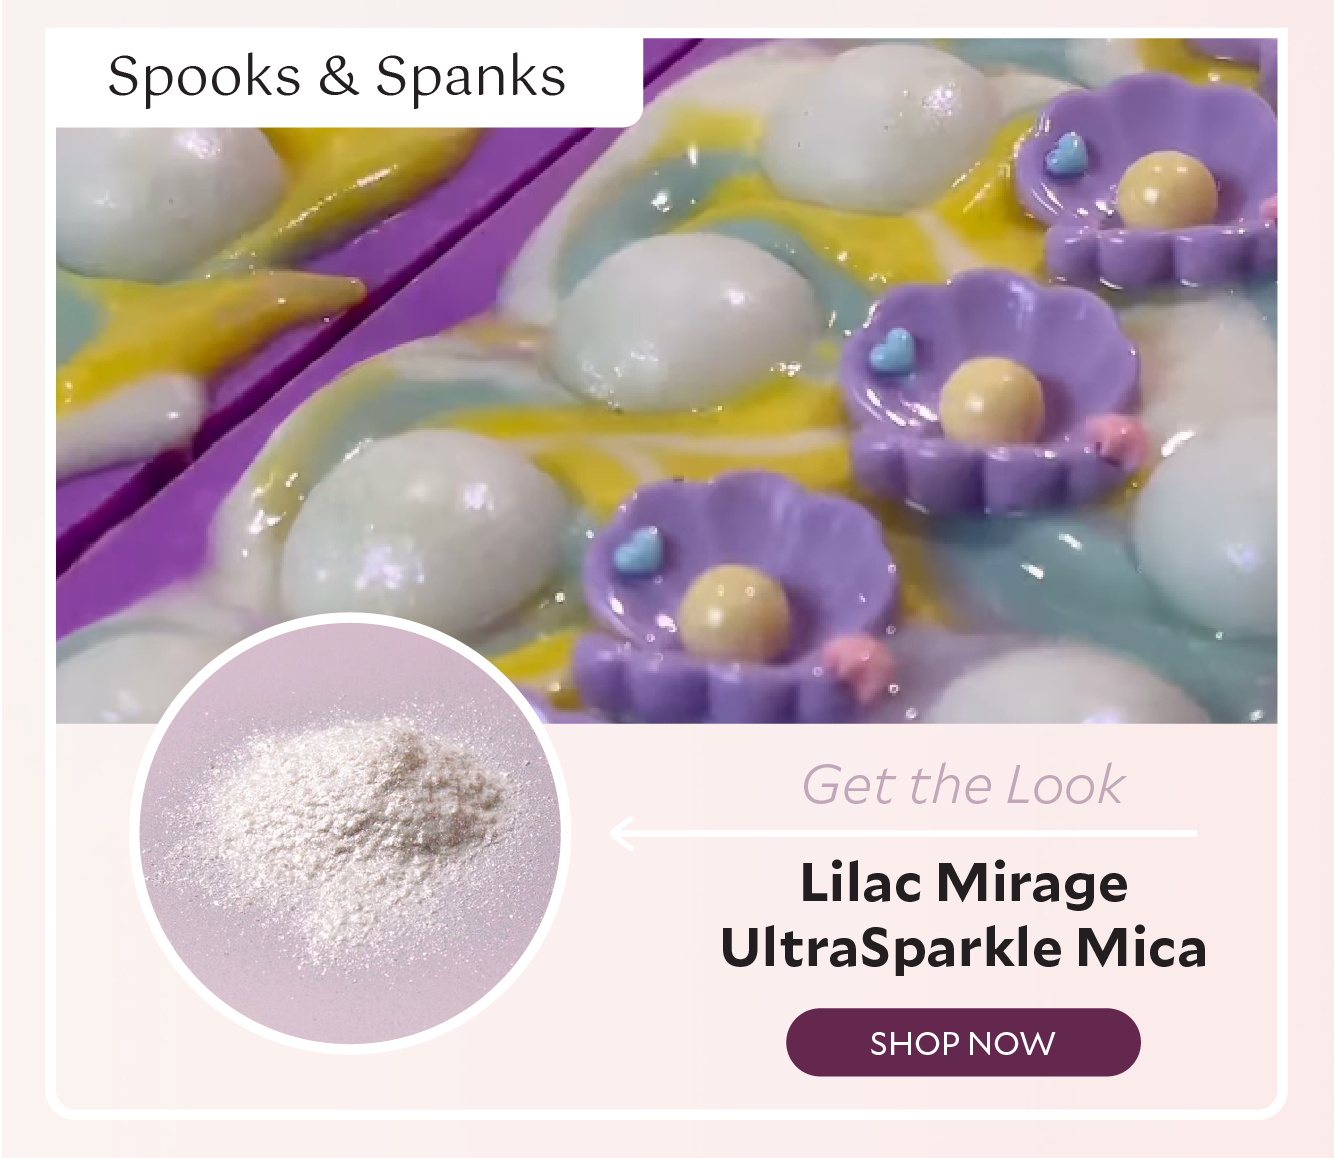 Spooks and Spanks was inspired by the new Lilac Mirage UltraSparkle Mica